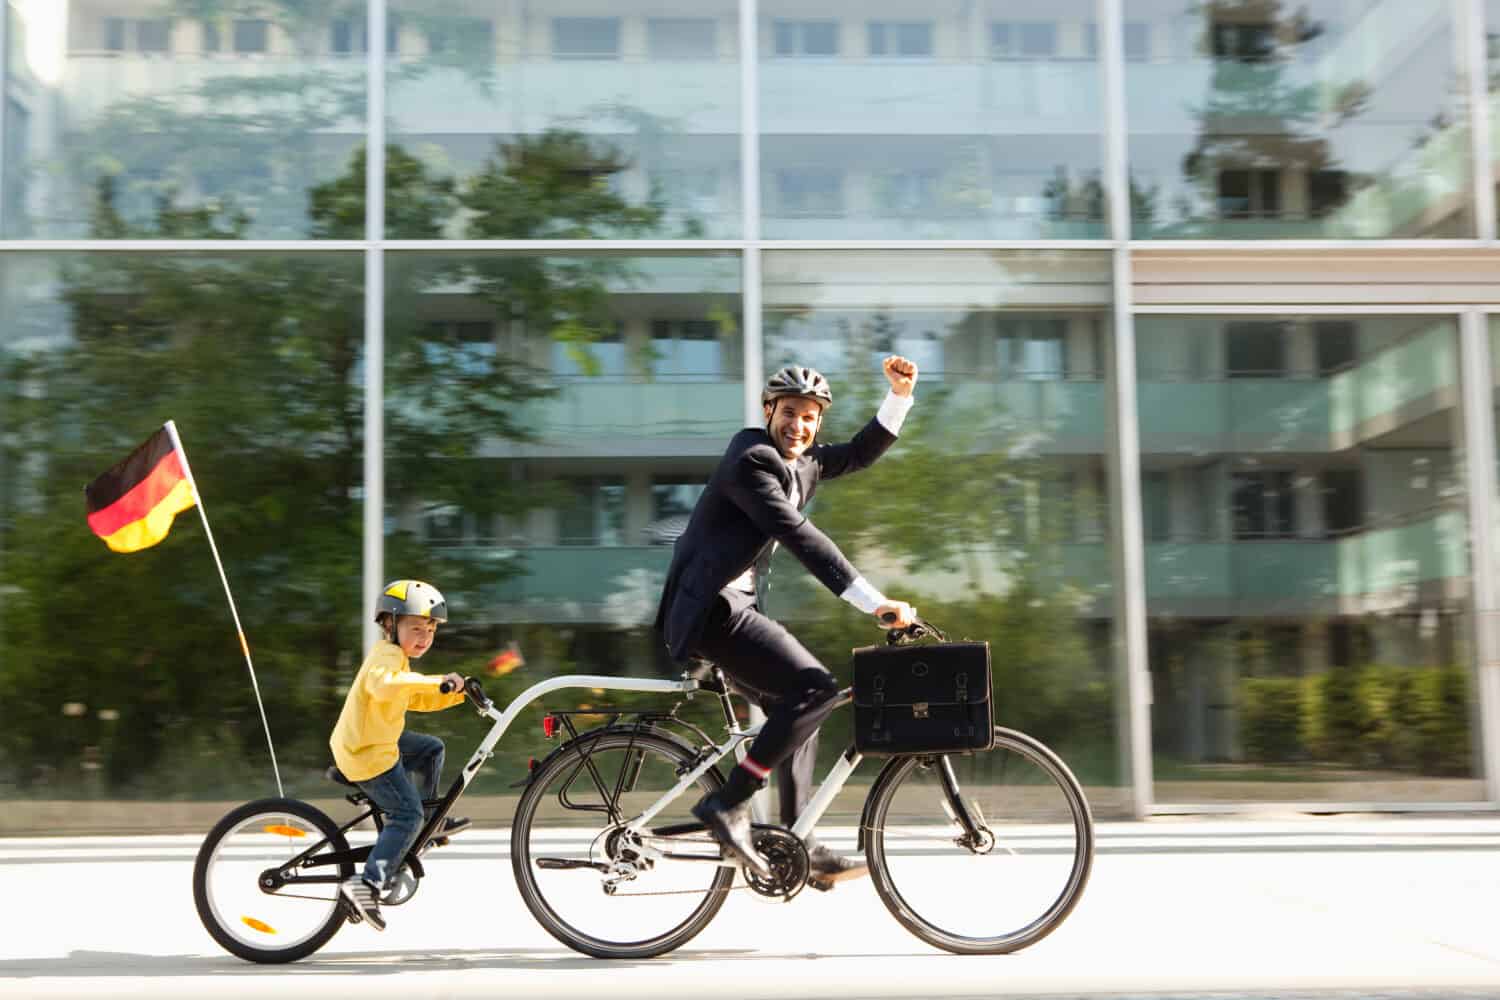 Father and son riding bicycle together on city street